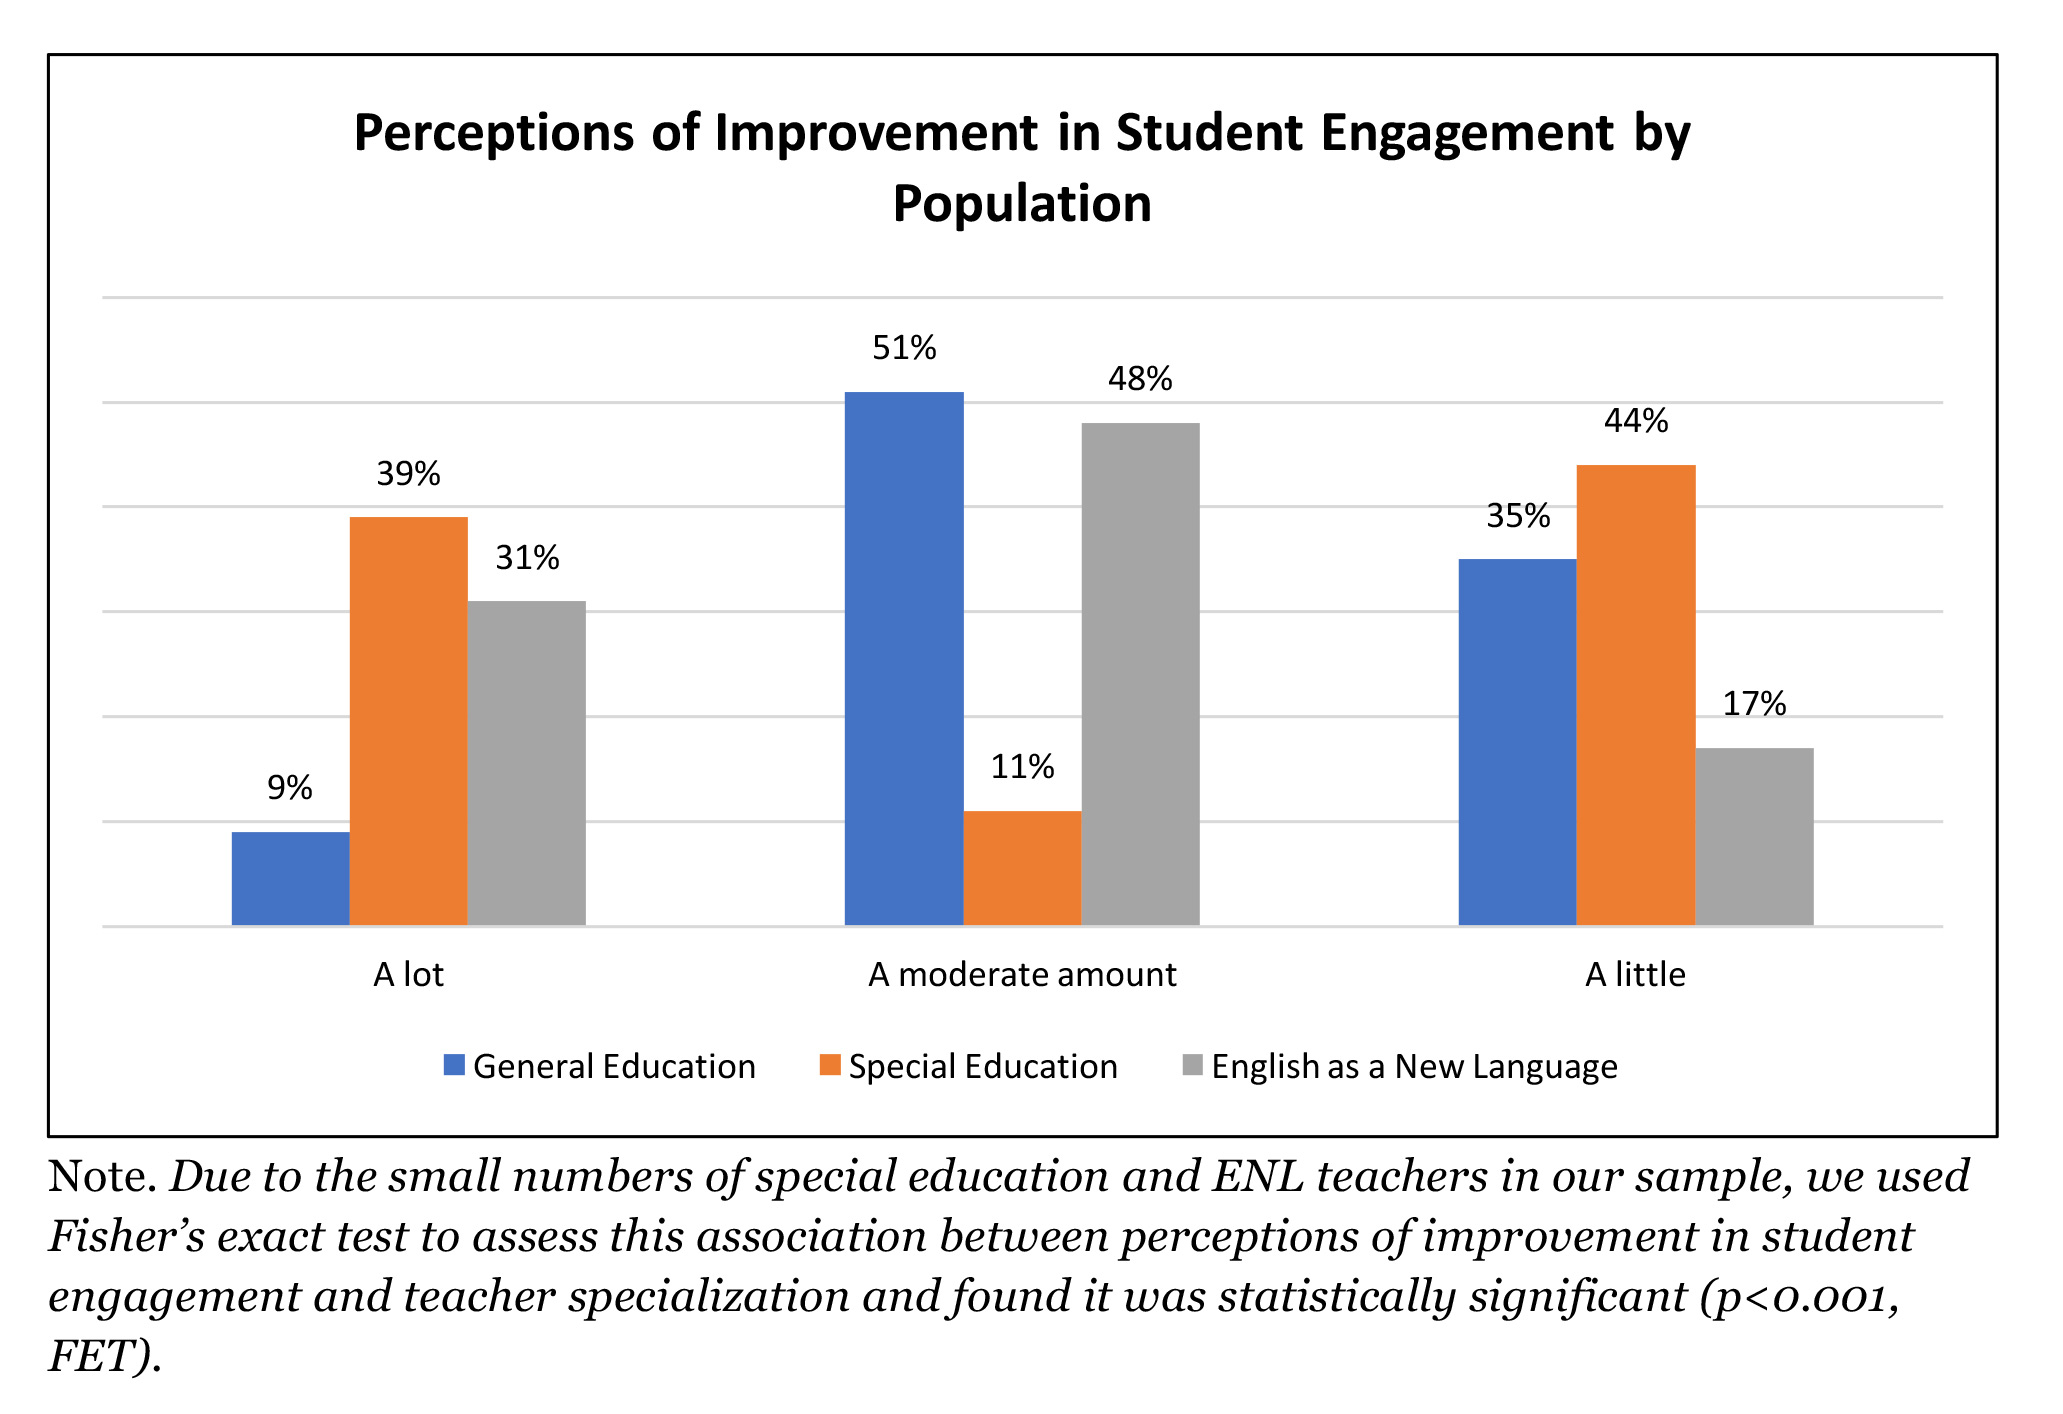 Perceptions of Improvement in Student Engagement by Population